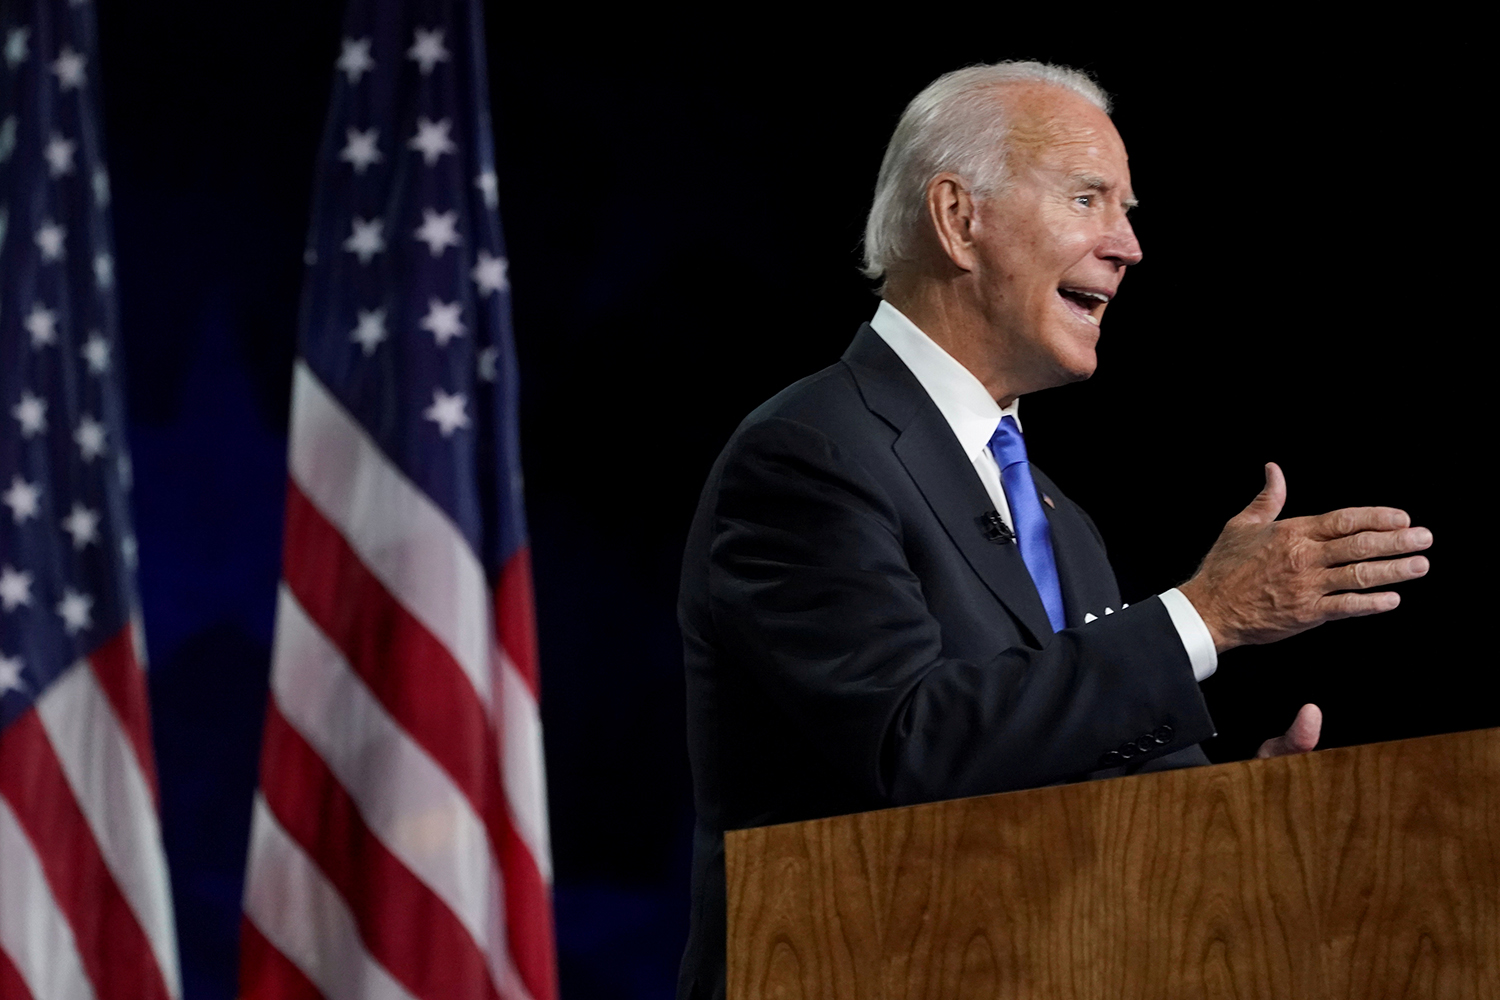 Adviser Biden's foreign policy: Start at and repair alliances - Atlantic Council